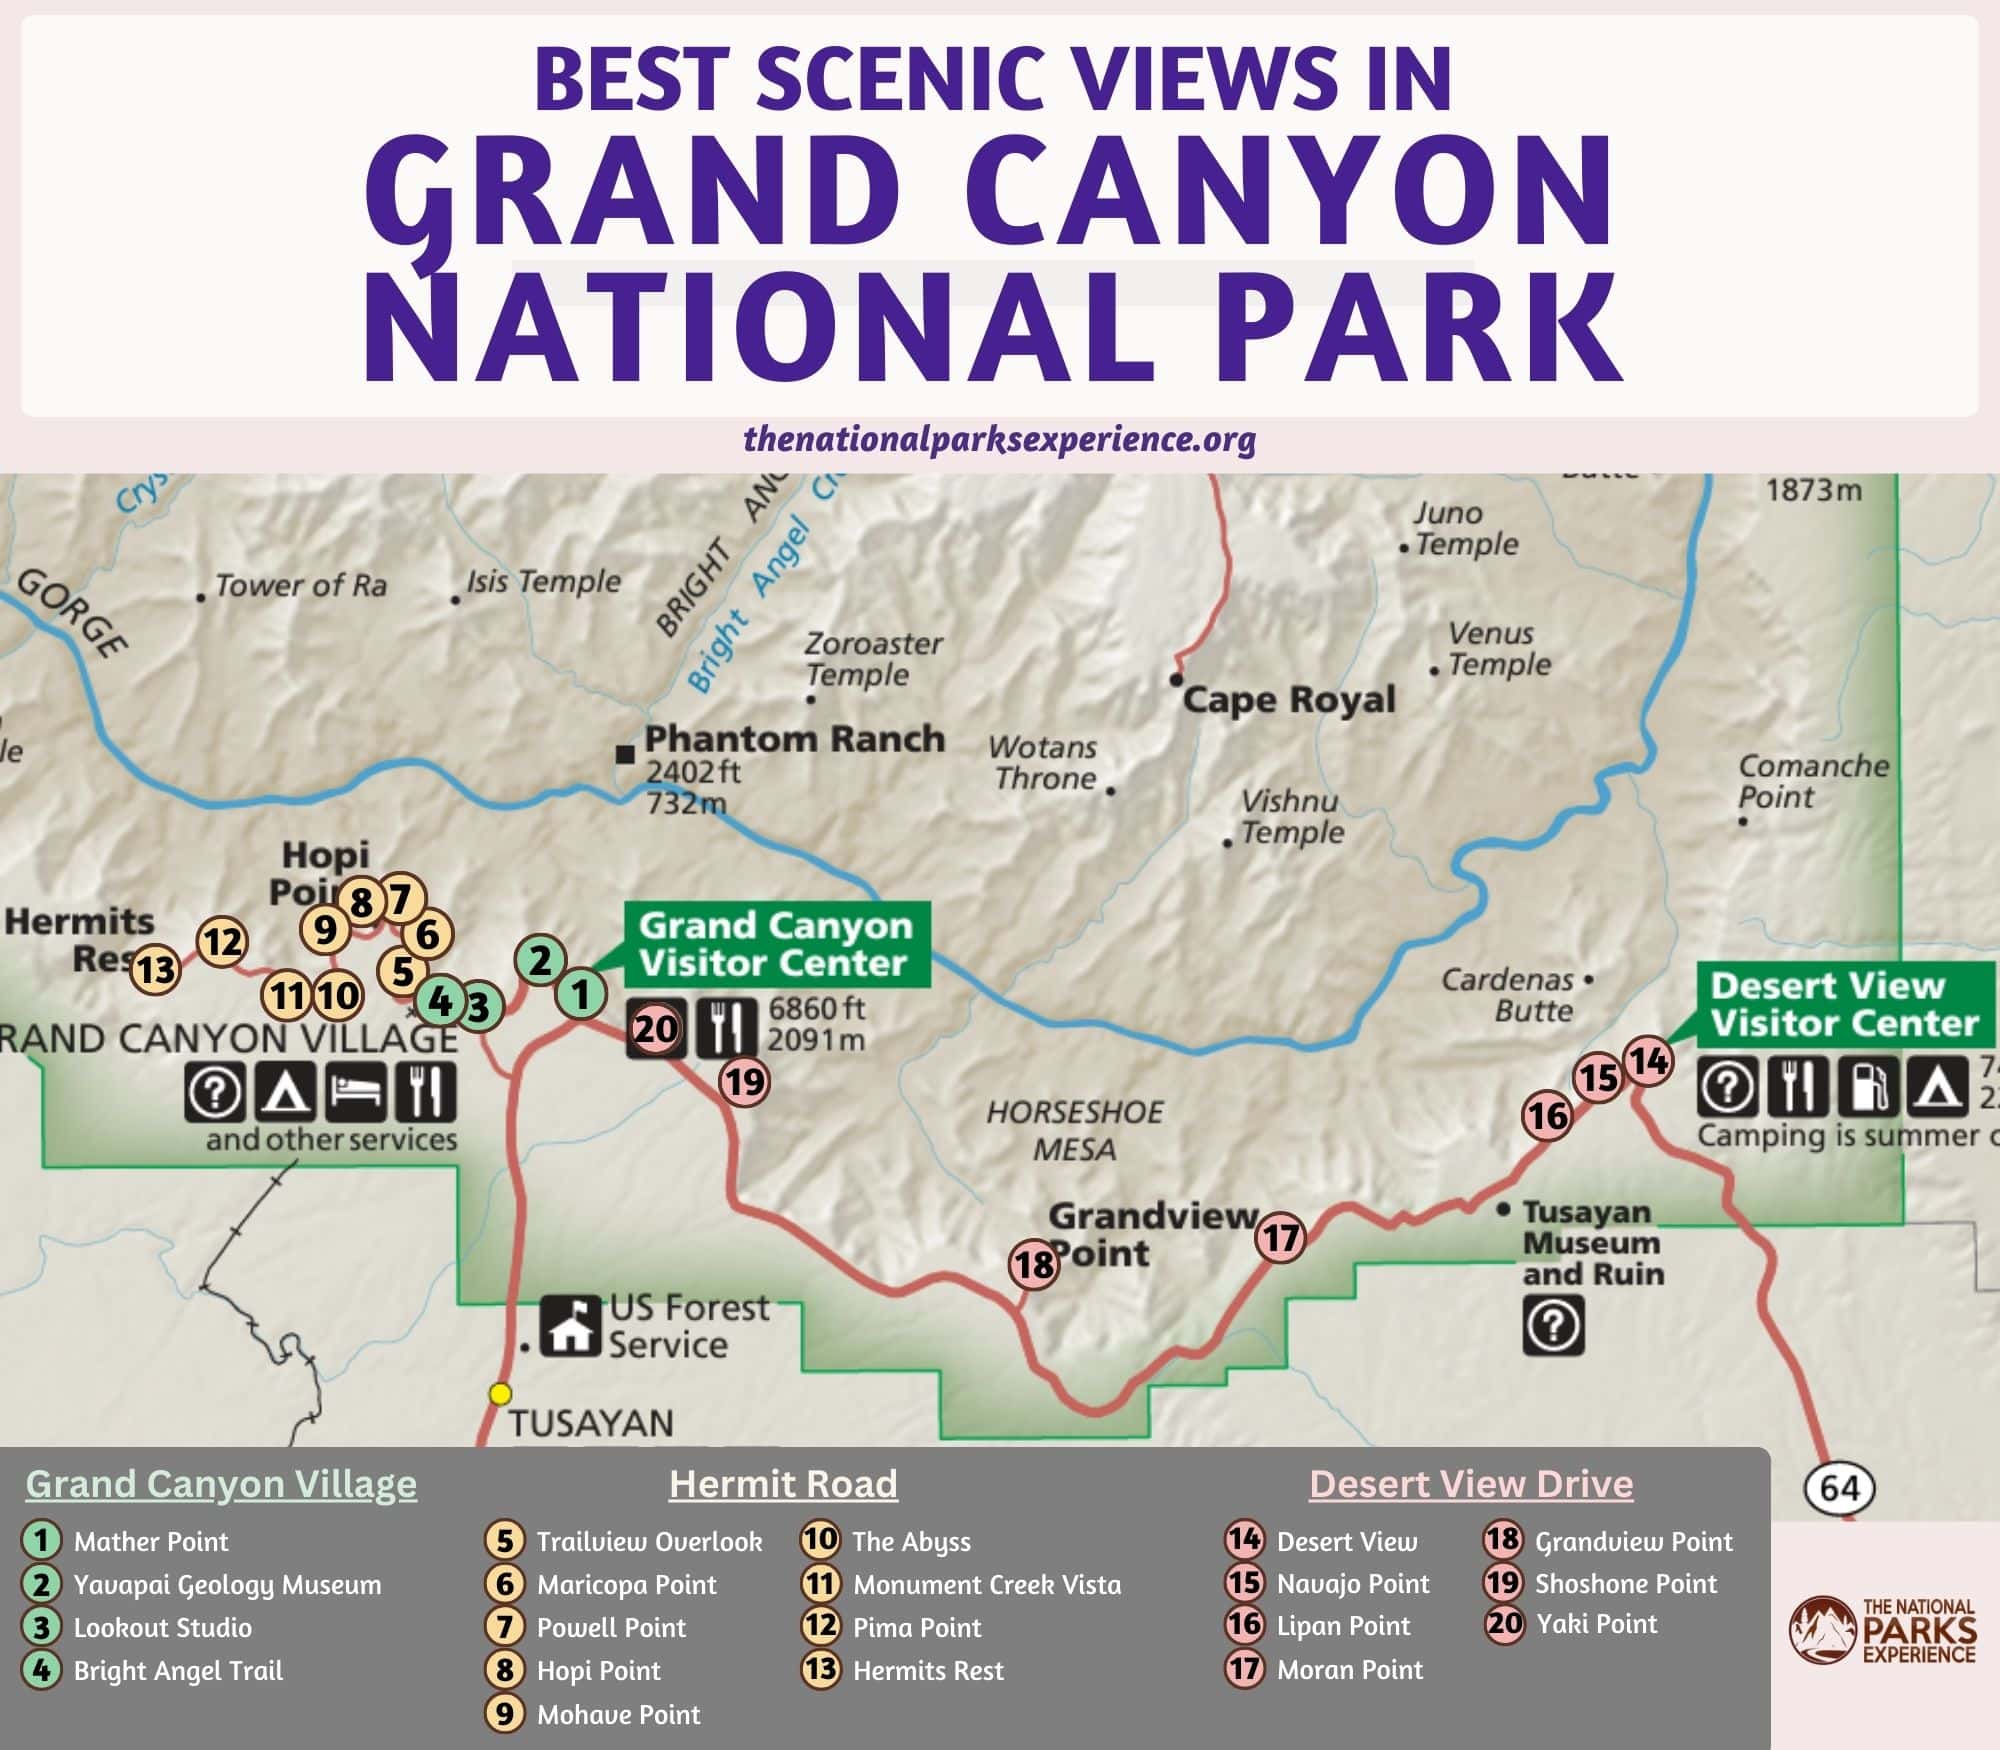 Map of the Best Scenic Views in Grand Canyon National Park (South Rim)